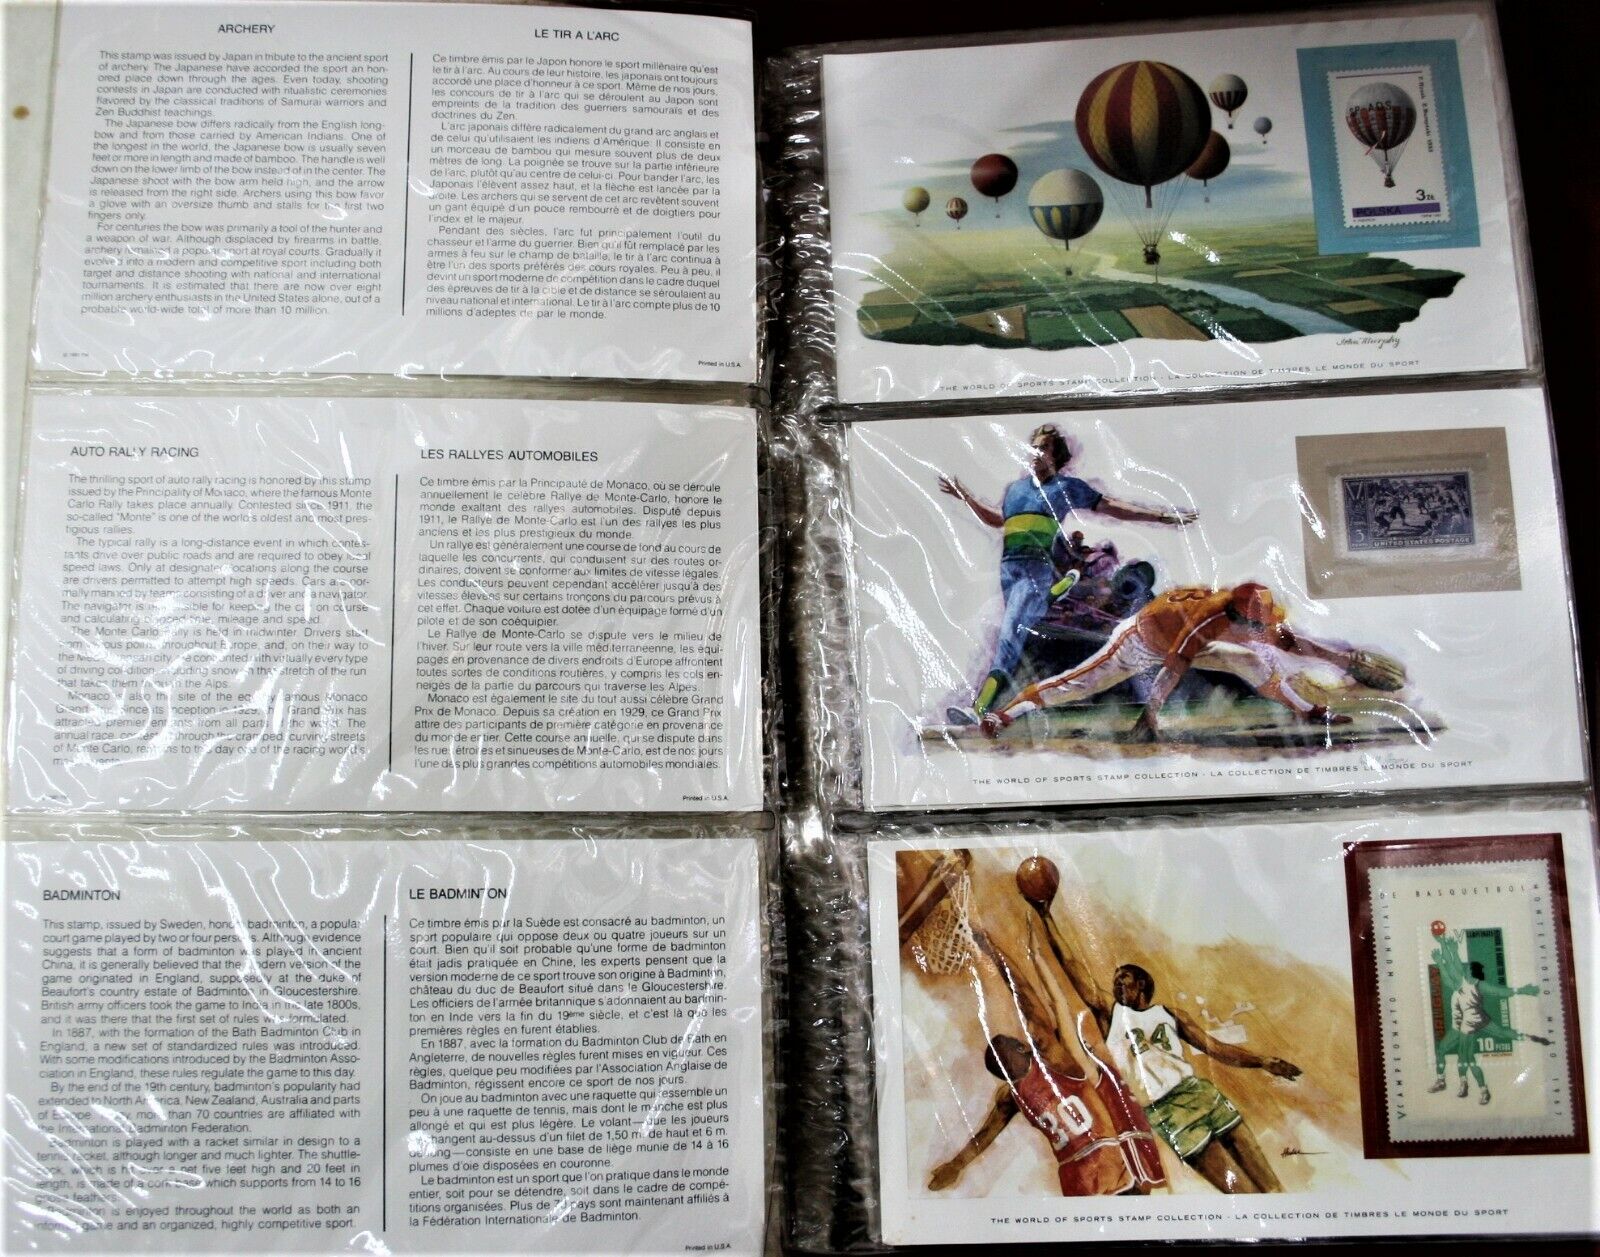 THE WORLD OF SPORTS STAMP COLLETION! 71 PERFECT CONDITION STAMPS! Без бренда - фотография #3